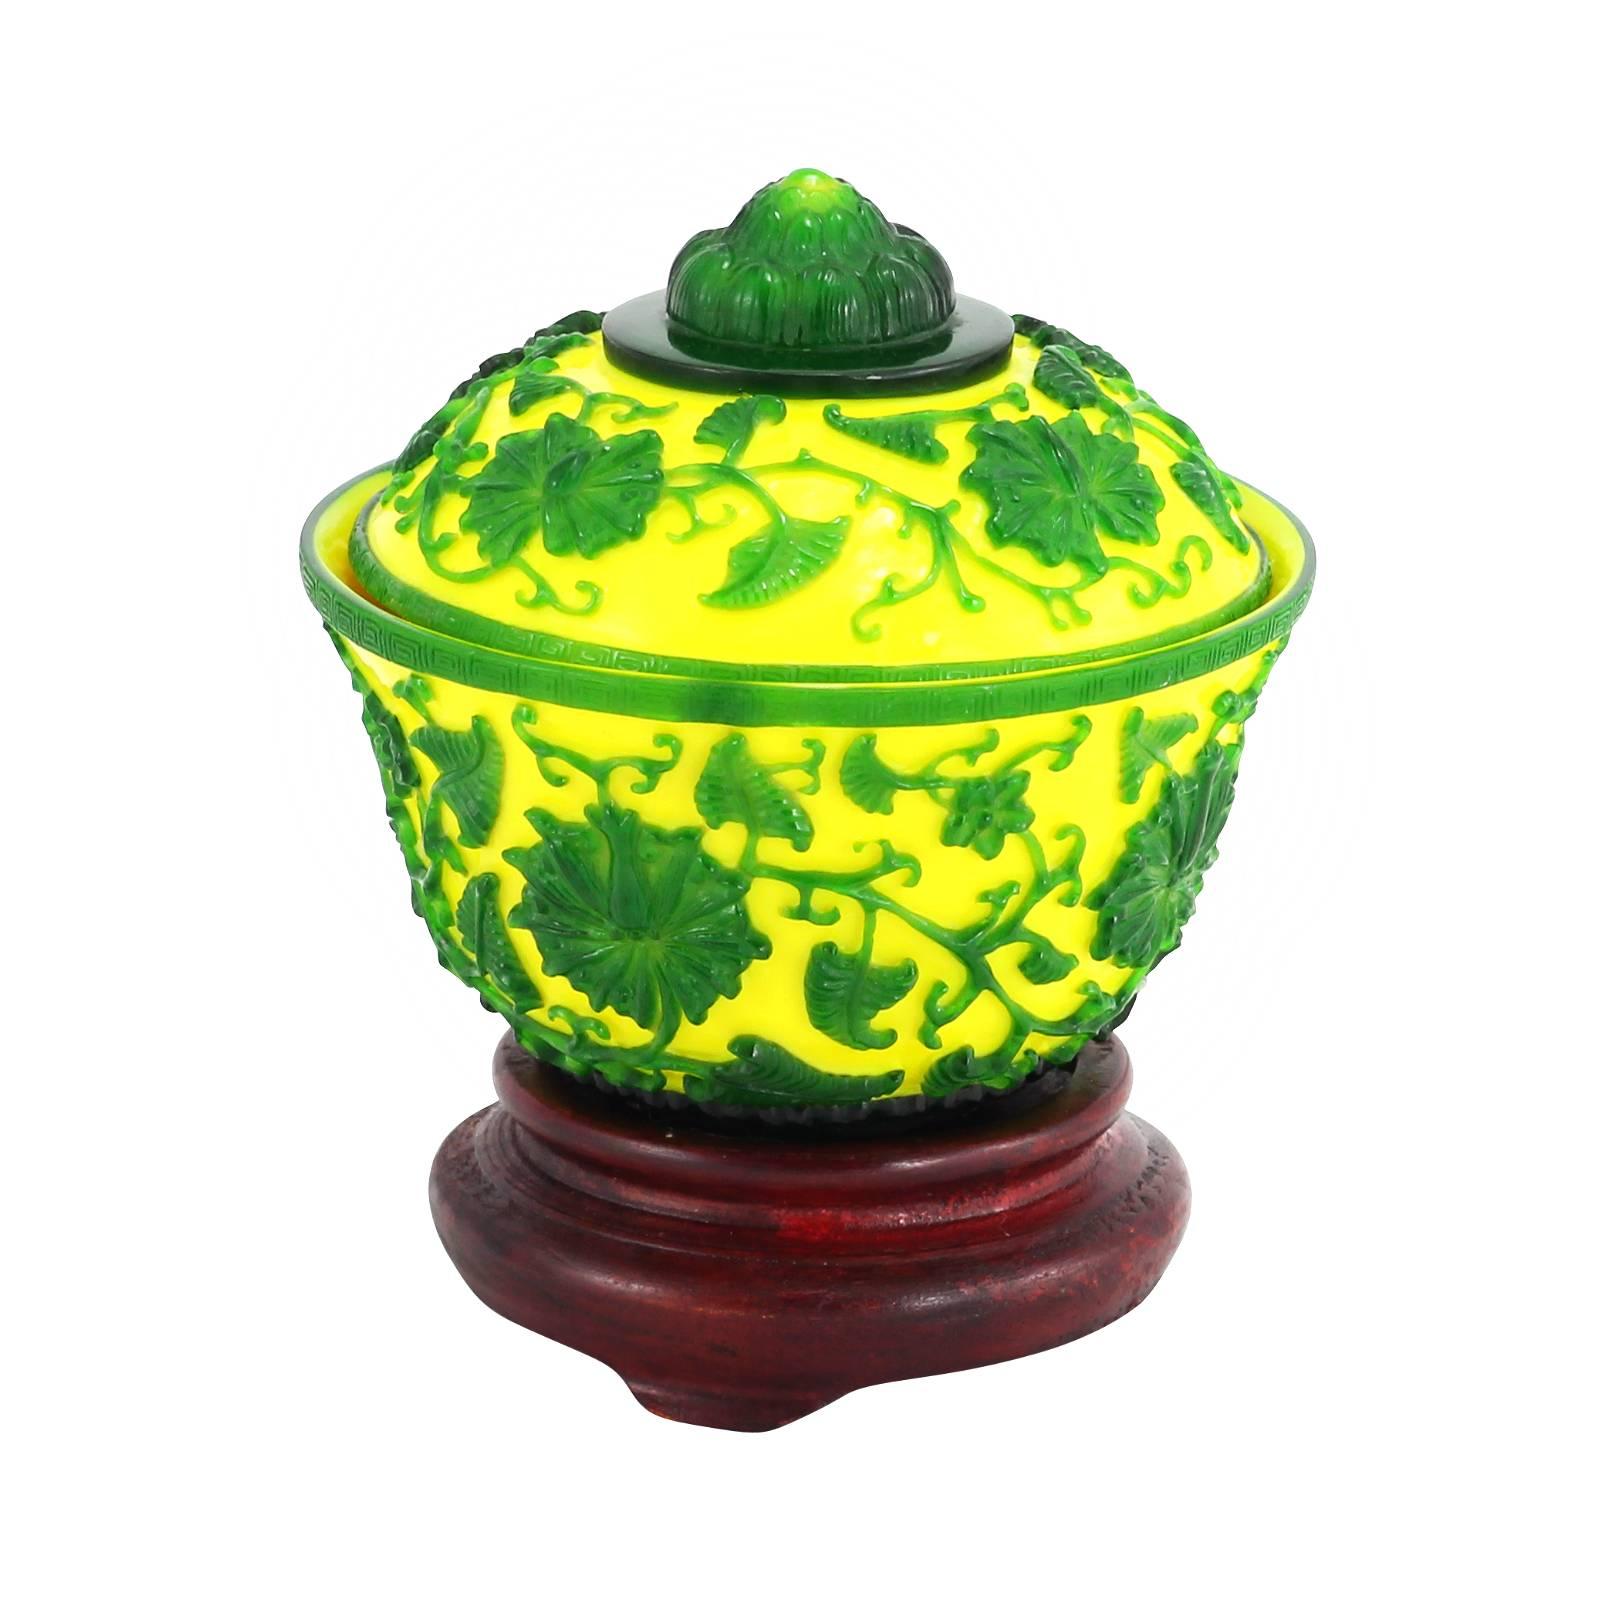 Late 19th century, Chinese yellow Peking glass lidded bowl with green overlay on wooden base.

Originating in Peking, China in the 18th century, this form of glasswork is achieved by layering different colored glasses around a core shape. The